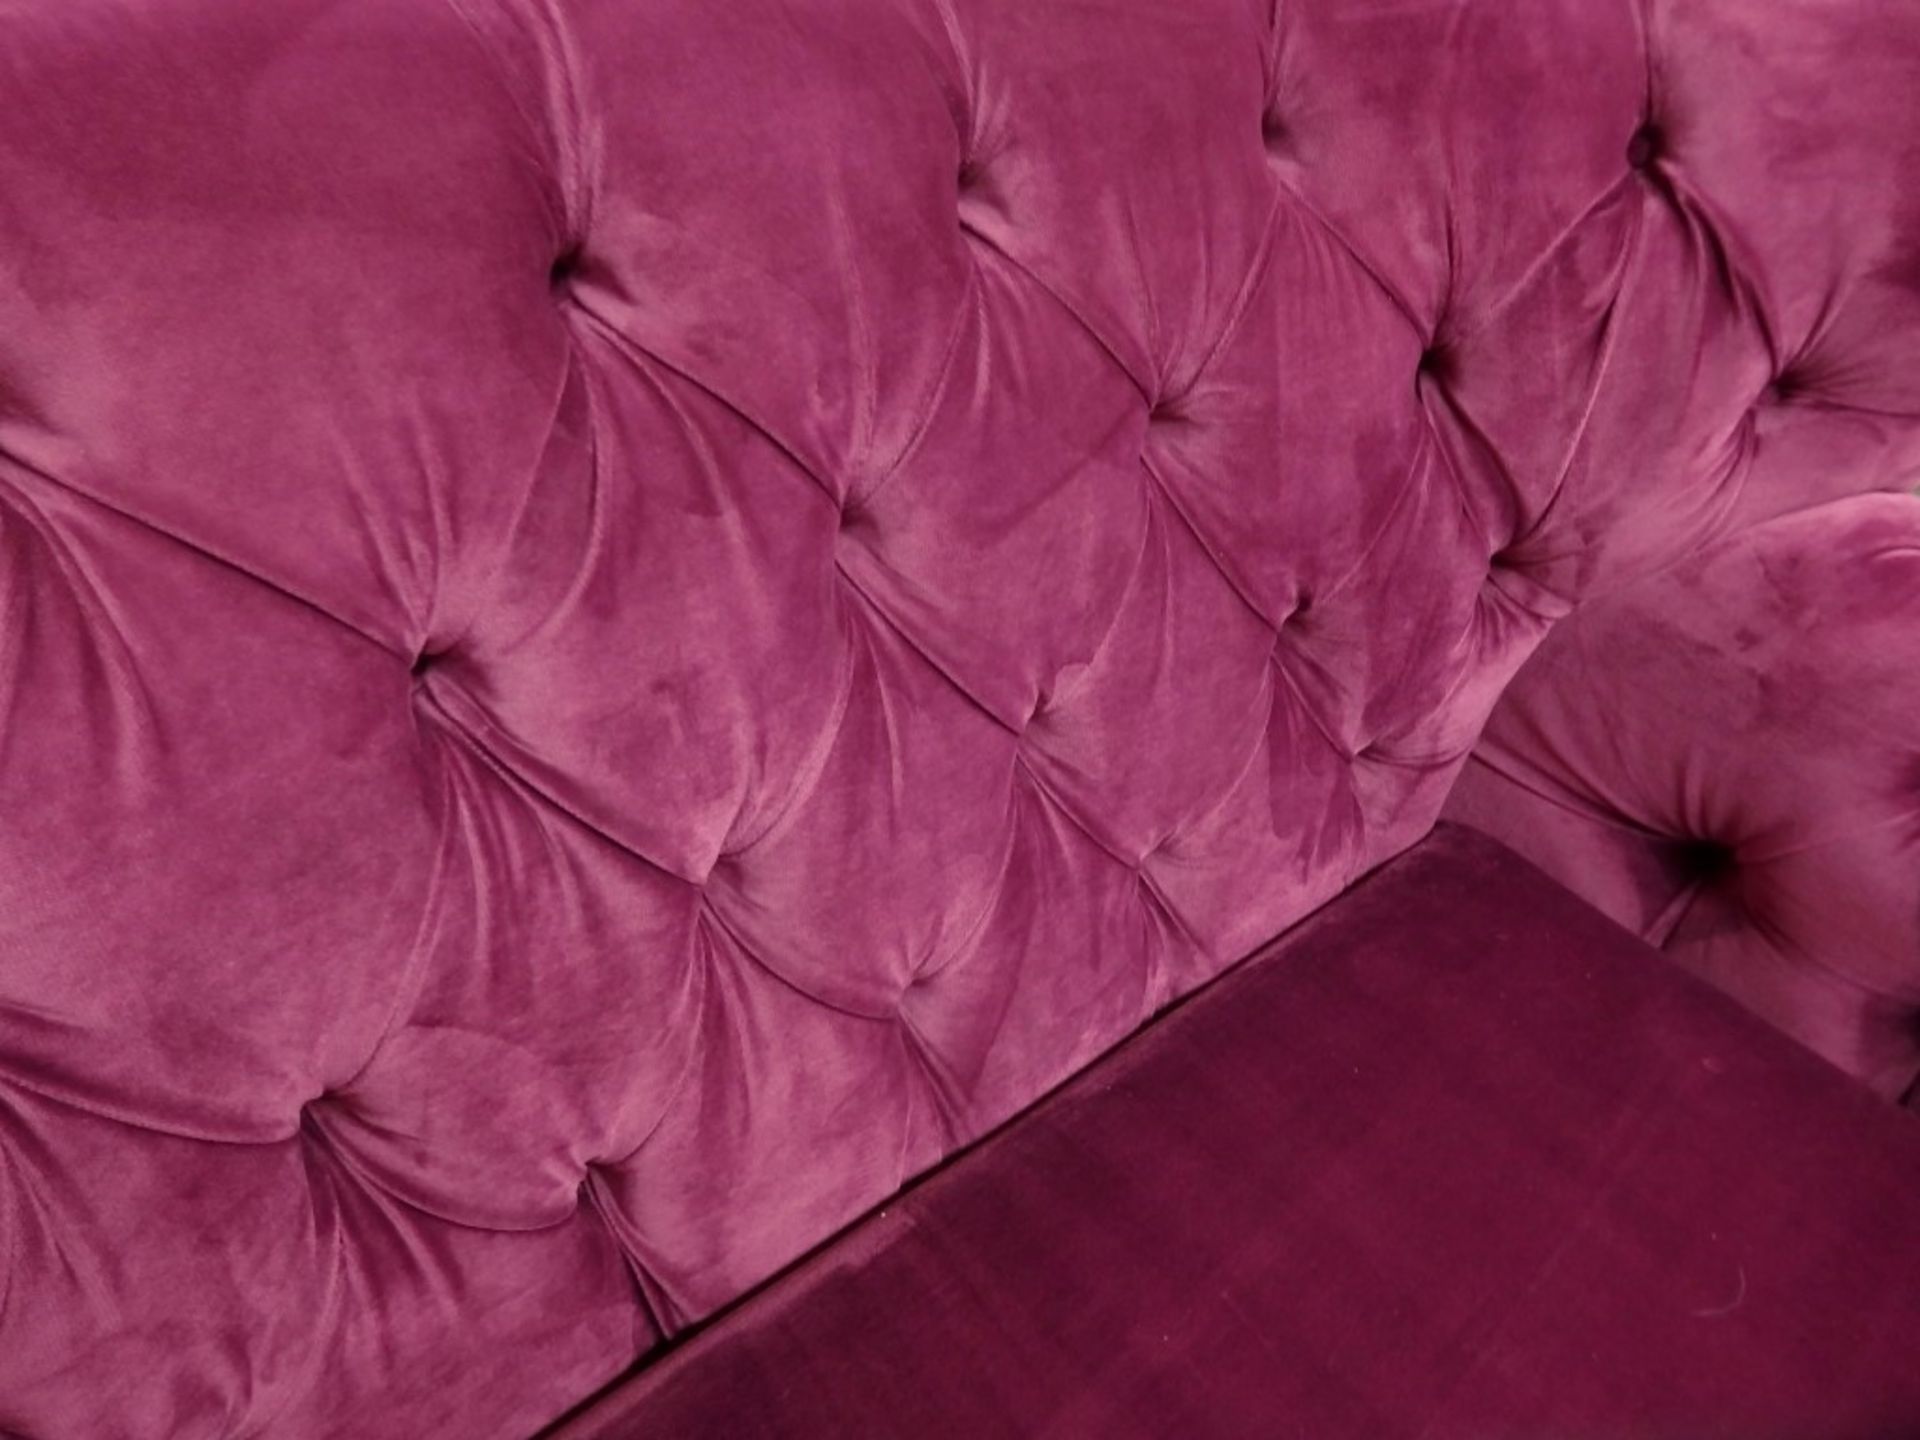 1 x Bespoke Oversized Chair (Cuddle Chair) - Upholstered In A Ritch Magenta Chenille - Expertly - Image 4 of 10